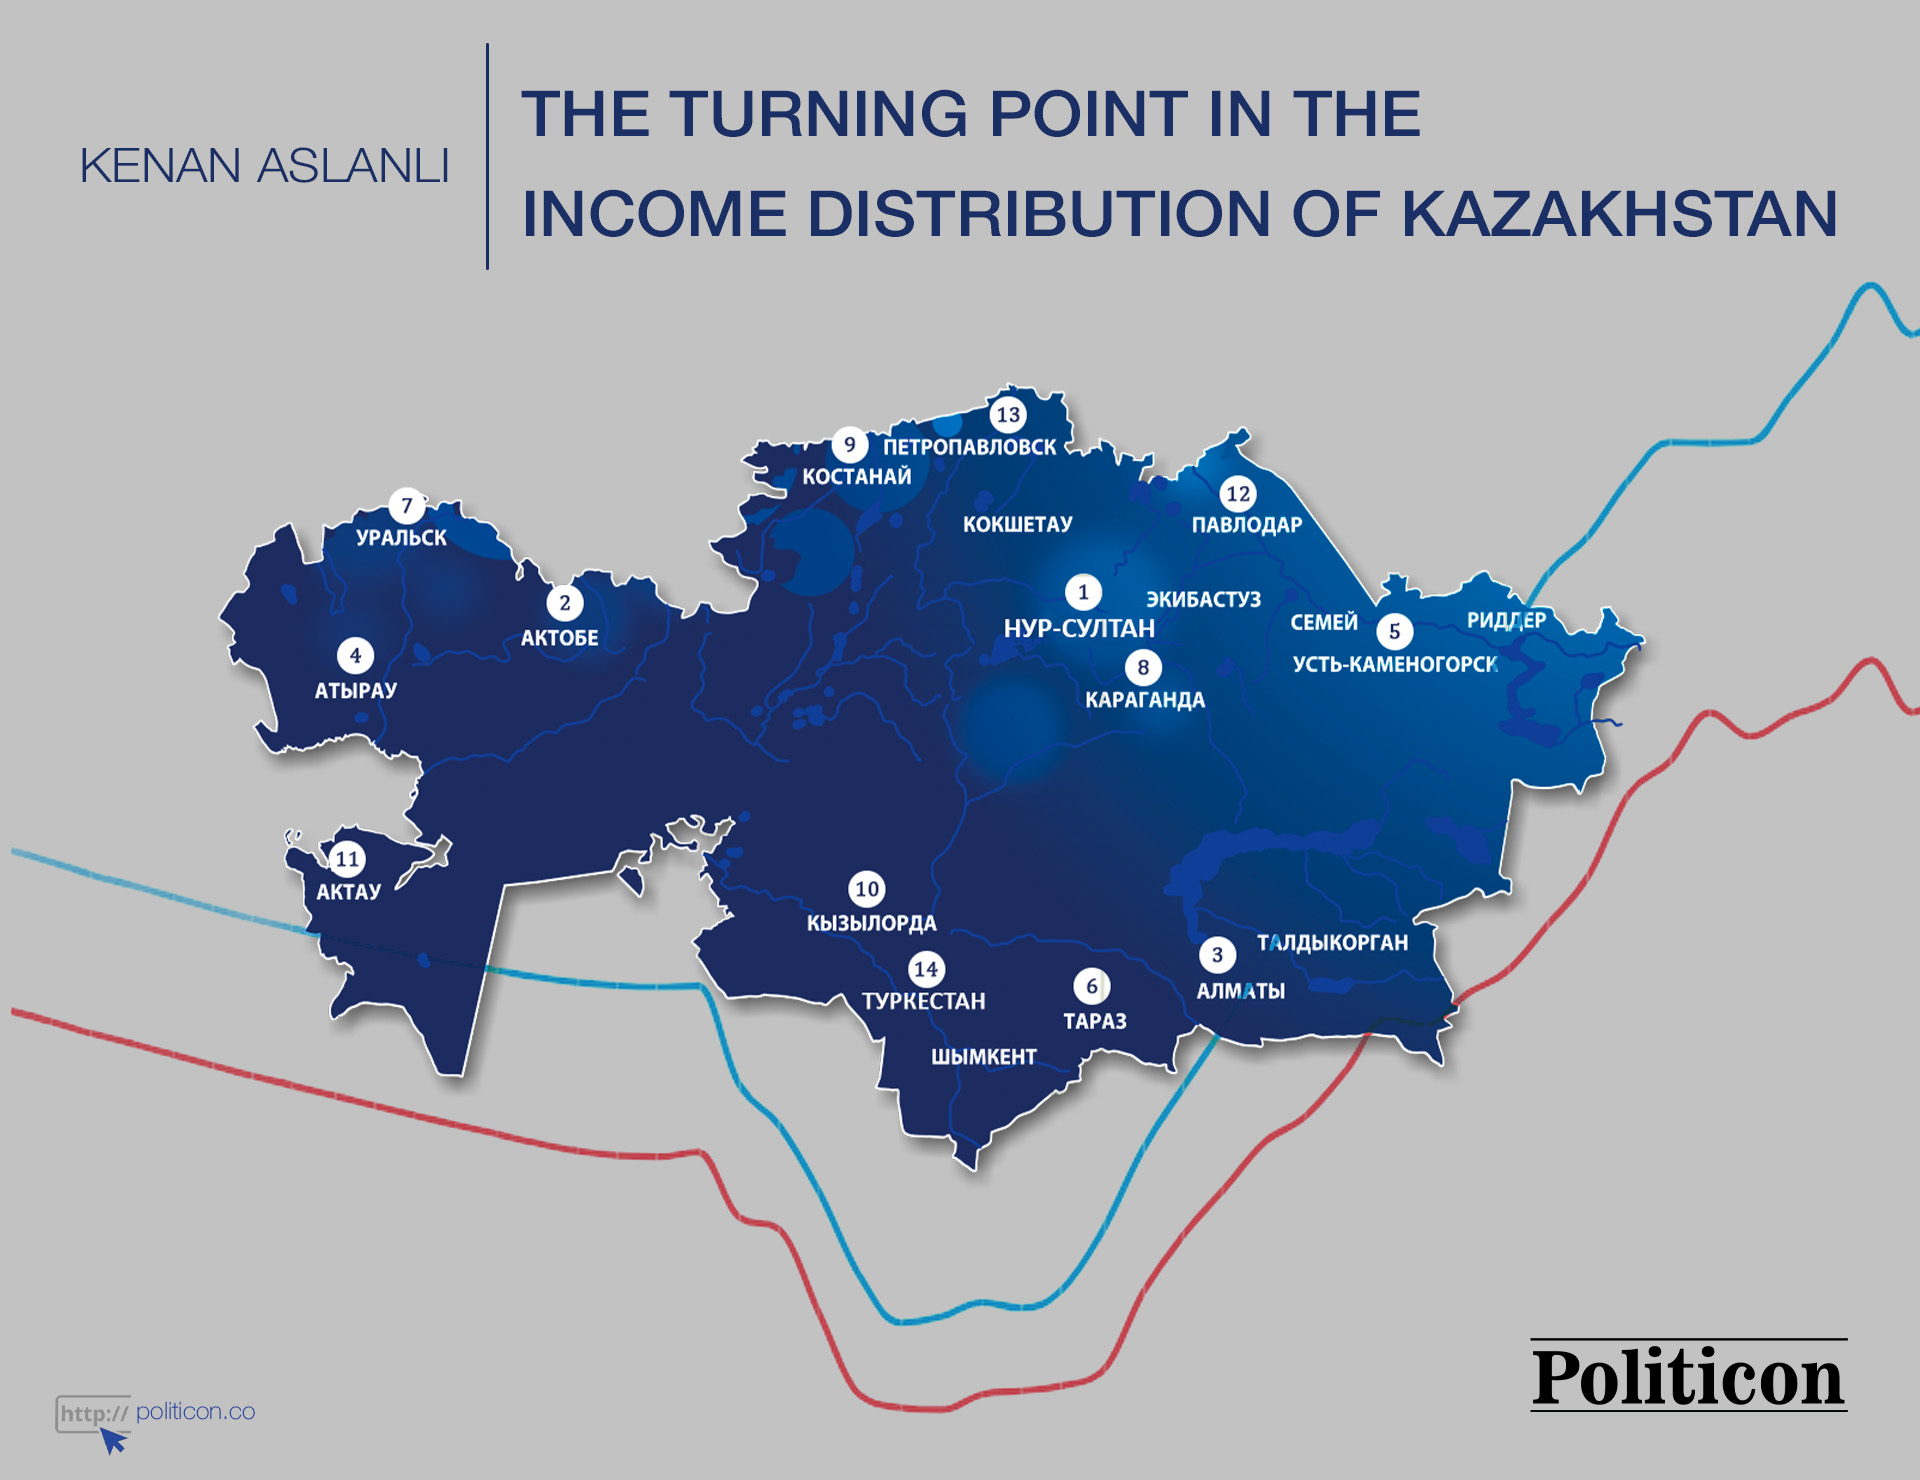 The turning point in the income distribution of Kazakhstan